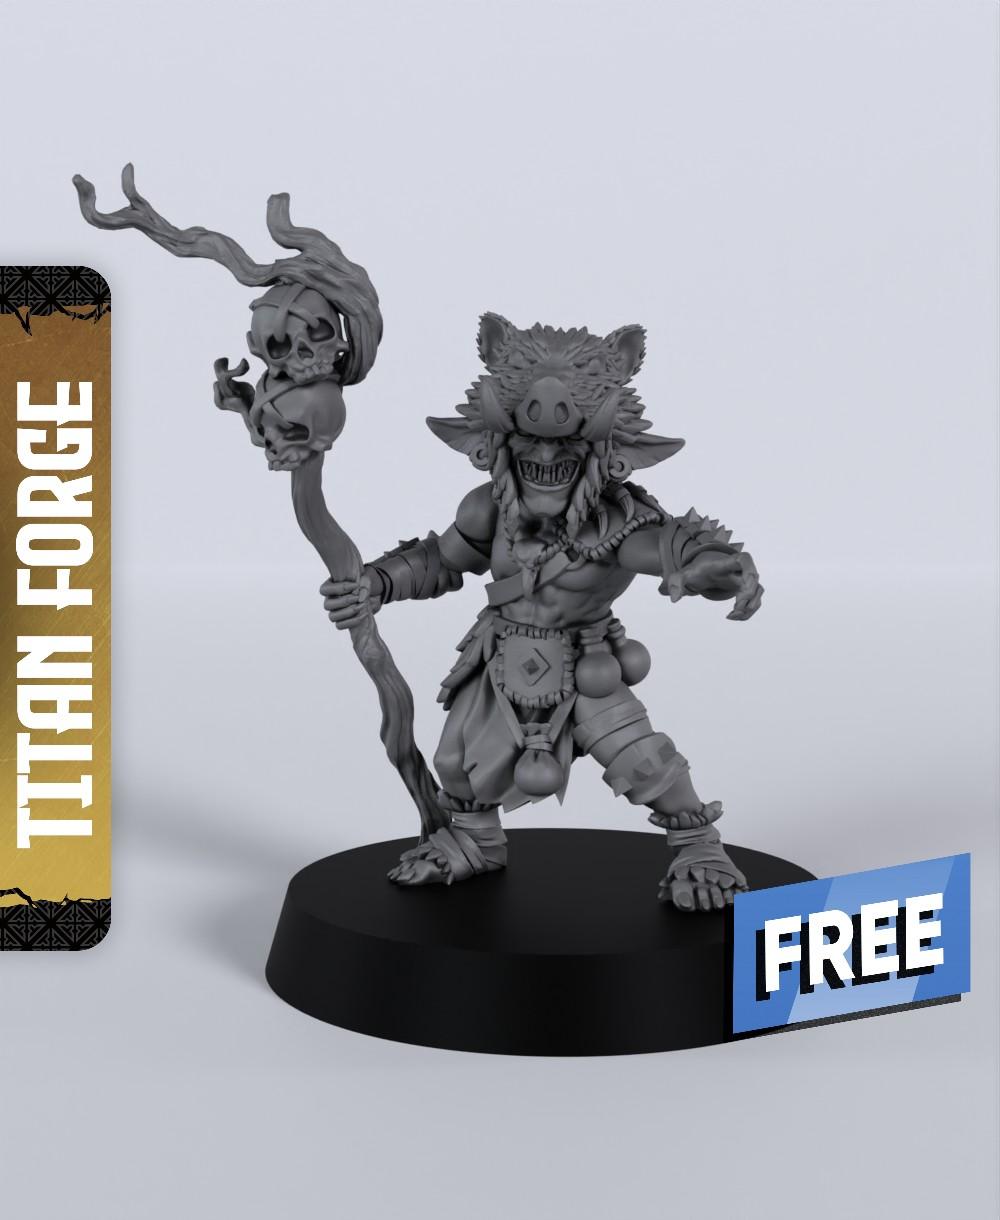 Goblin Shaman - With Free Dragon Warhammer - 5e DnD Inspired for RPG and Wargamers 3d model